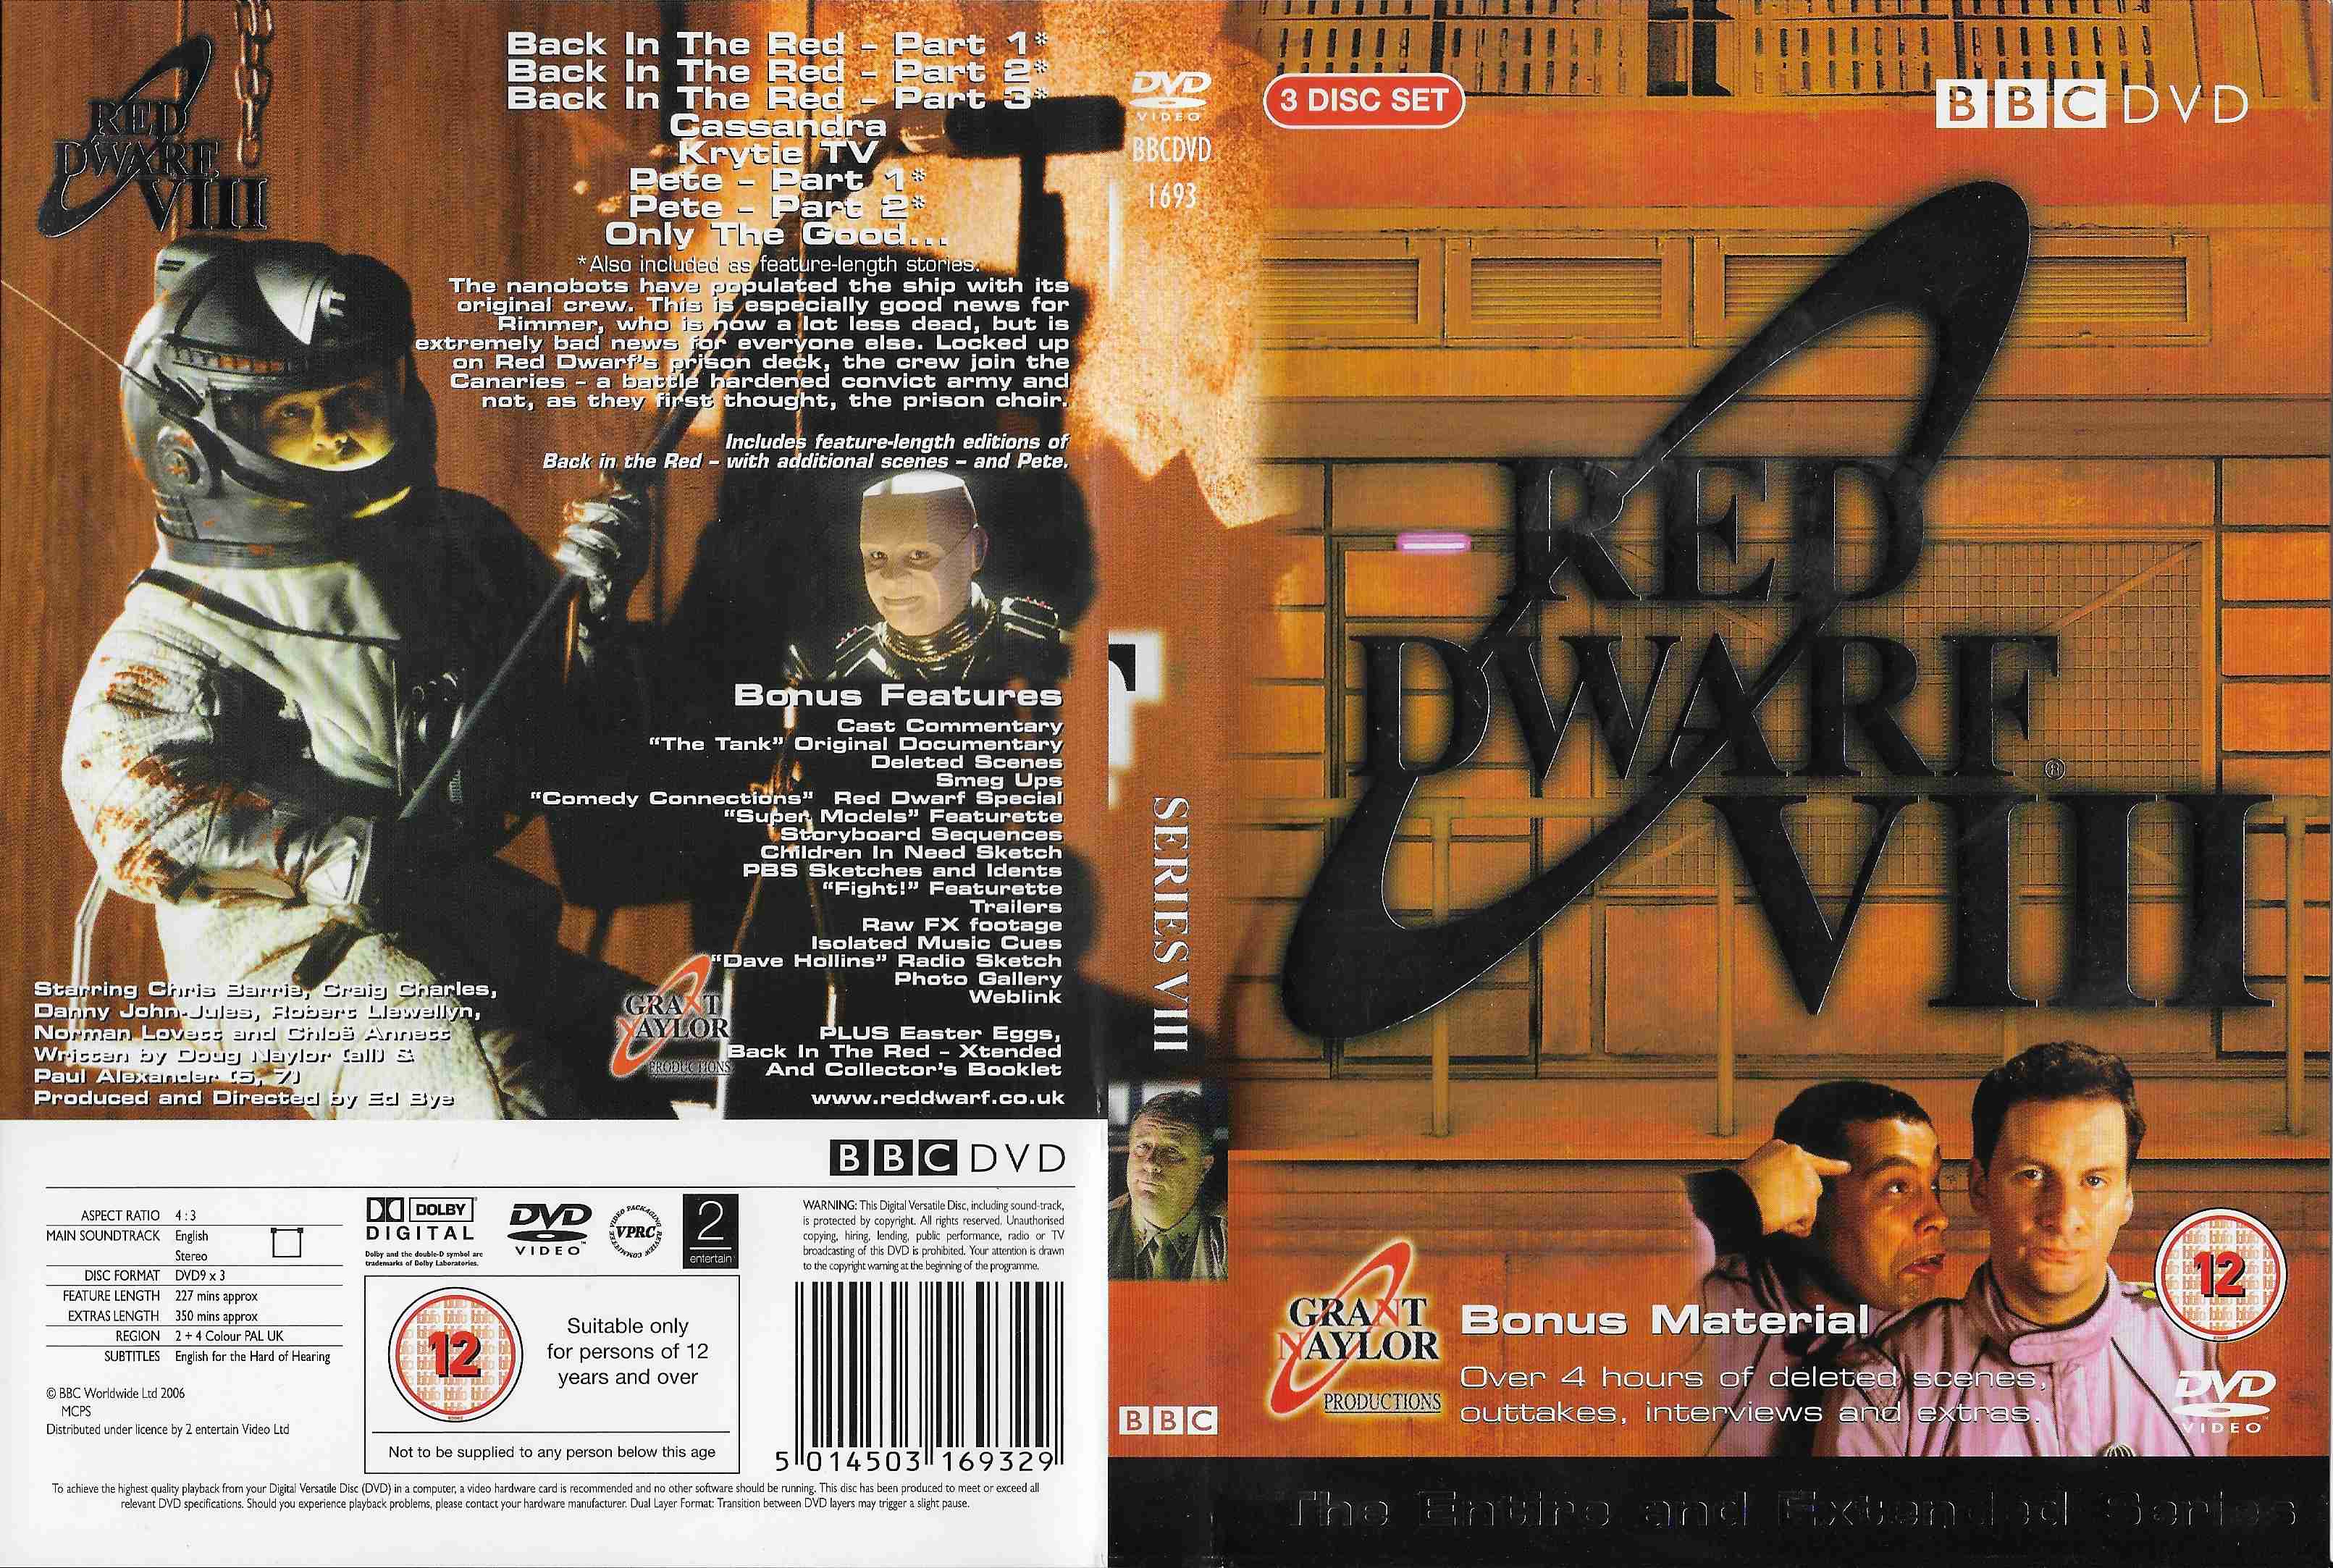 Picture of BBCDVD 1939 Red dwarf - Series VIII by artist Rob Grant / Doug Naylor from the BBC records and Tapes library